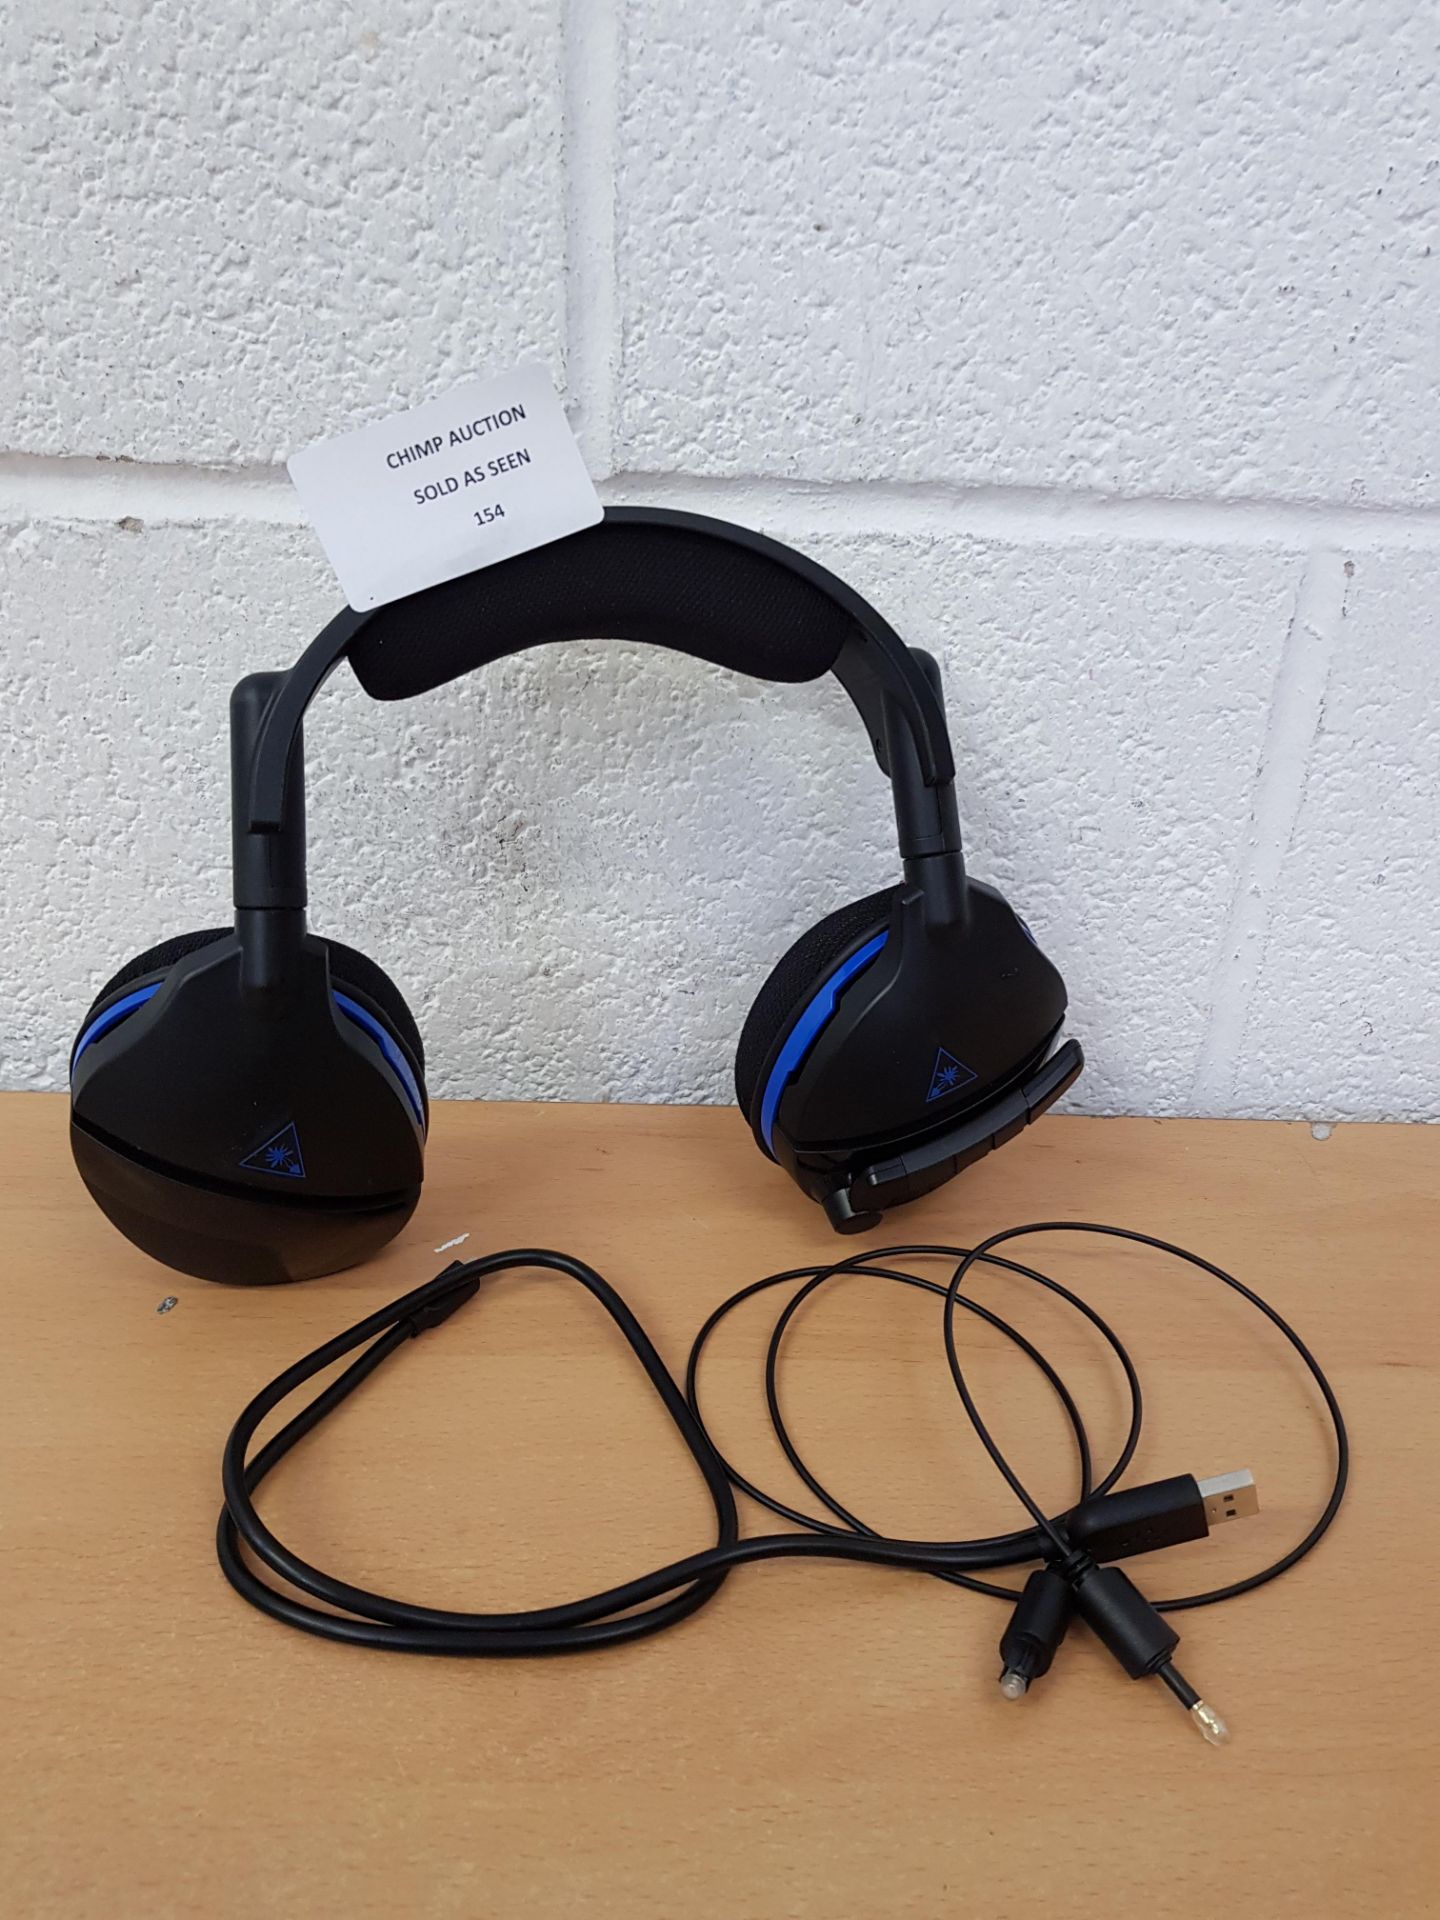 Turtle Beach Stealth 600 Wireless Gaming Headset RRP £129.99.